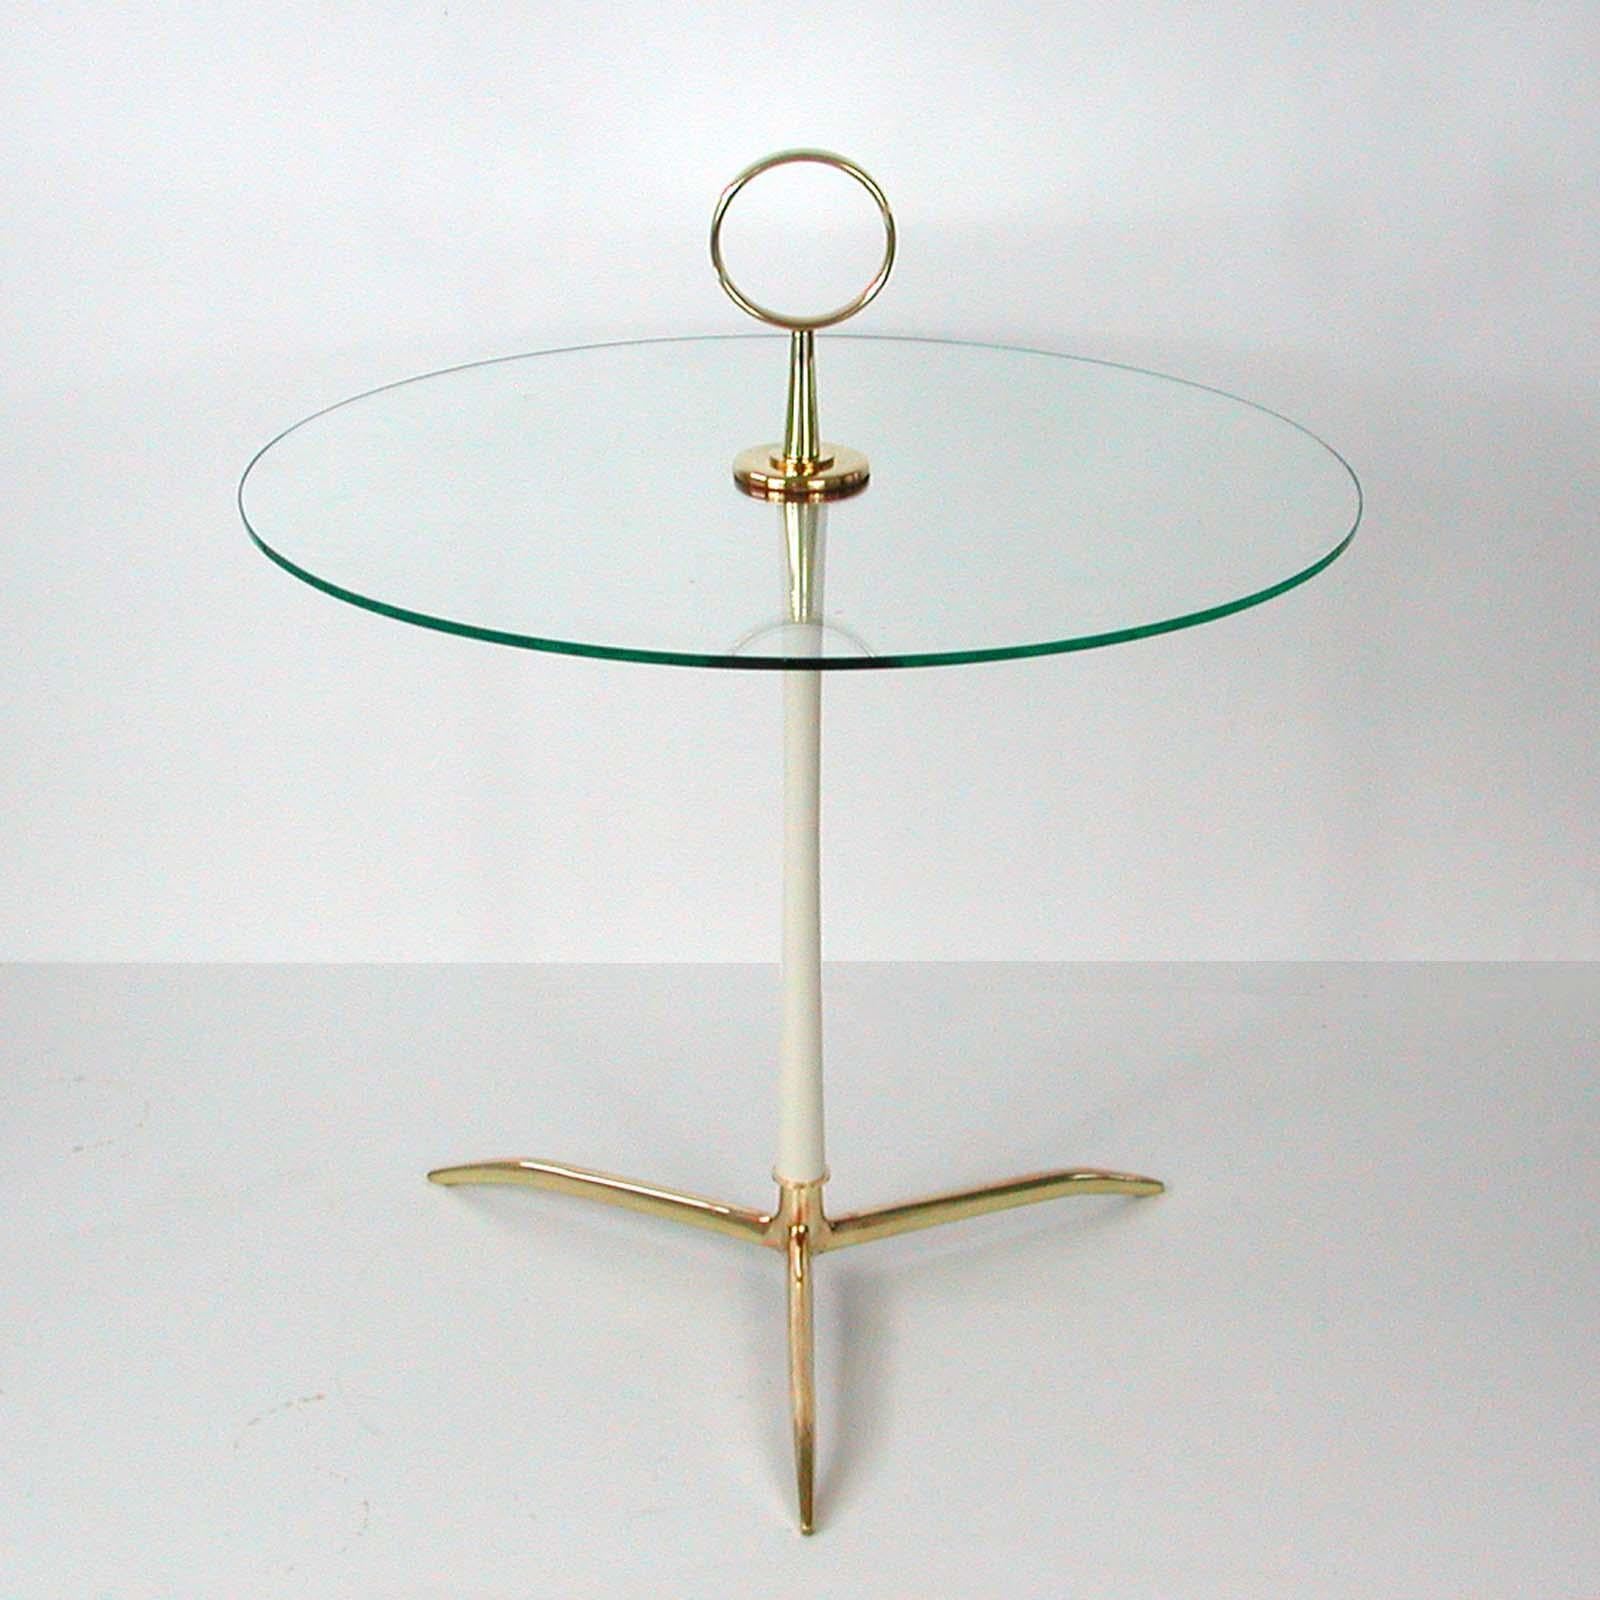 Cesare Lacca Midcentury Brass and Clear Glass Tripod Side Table, Italy, 1950s For Sale 3